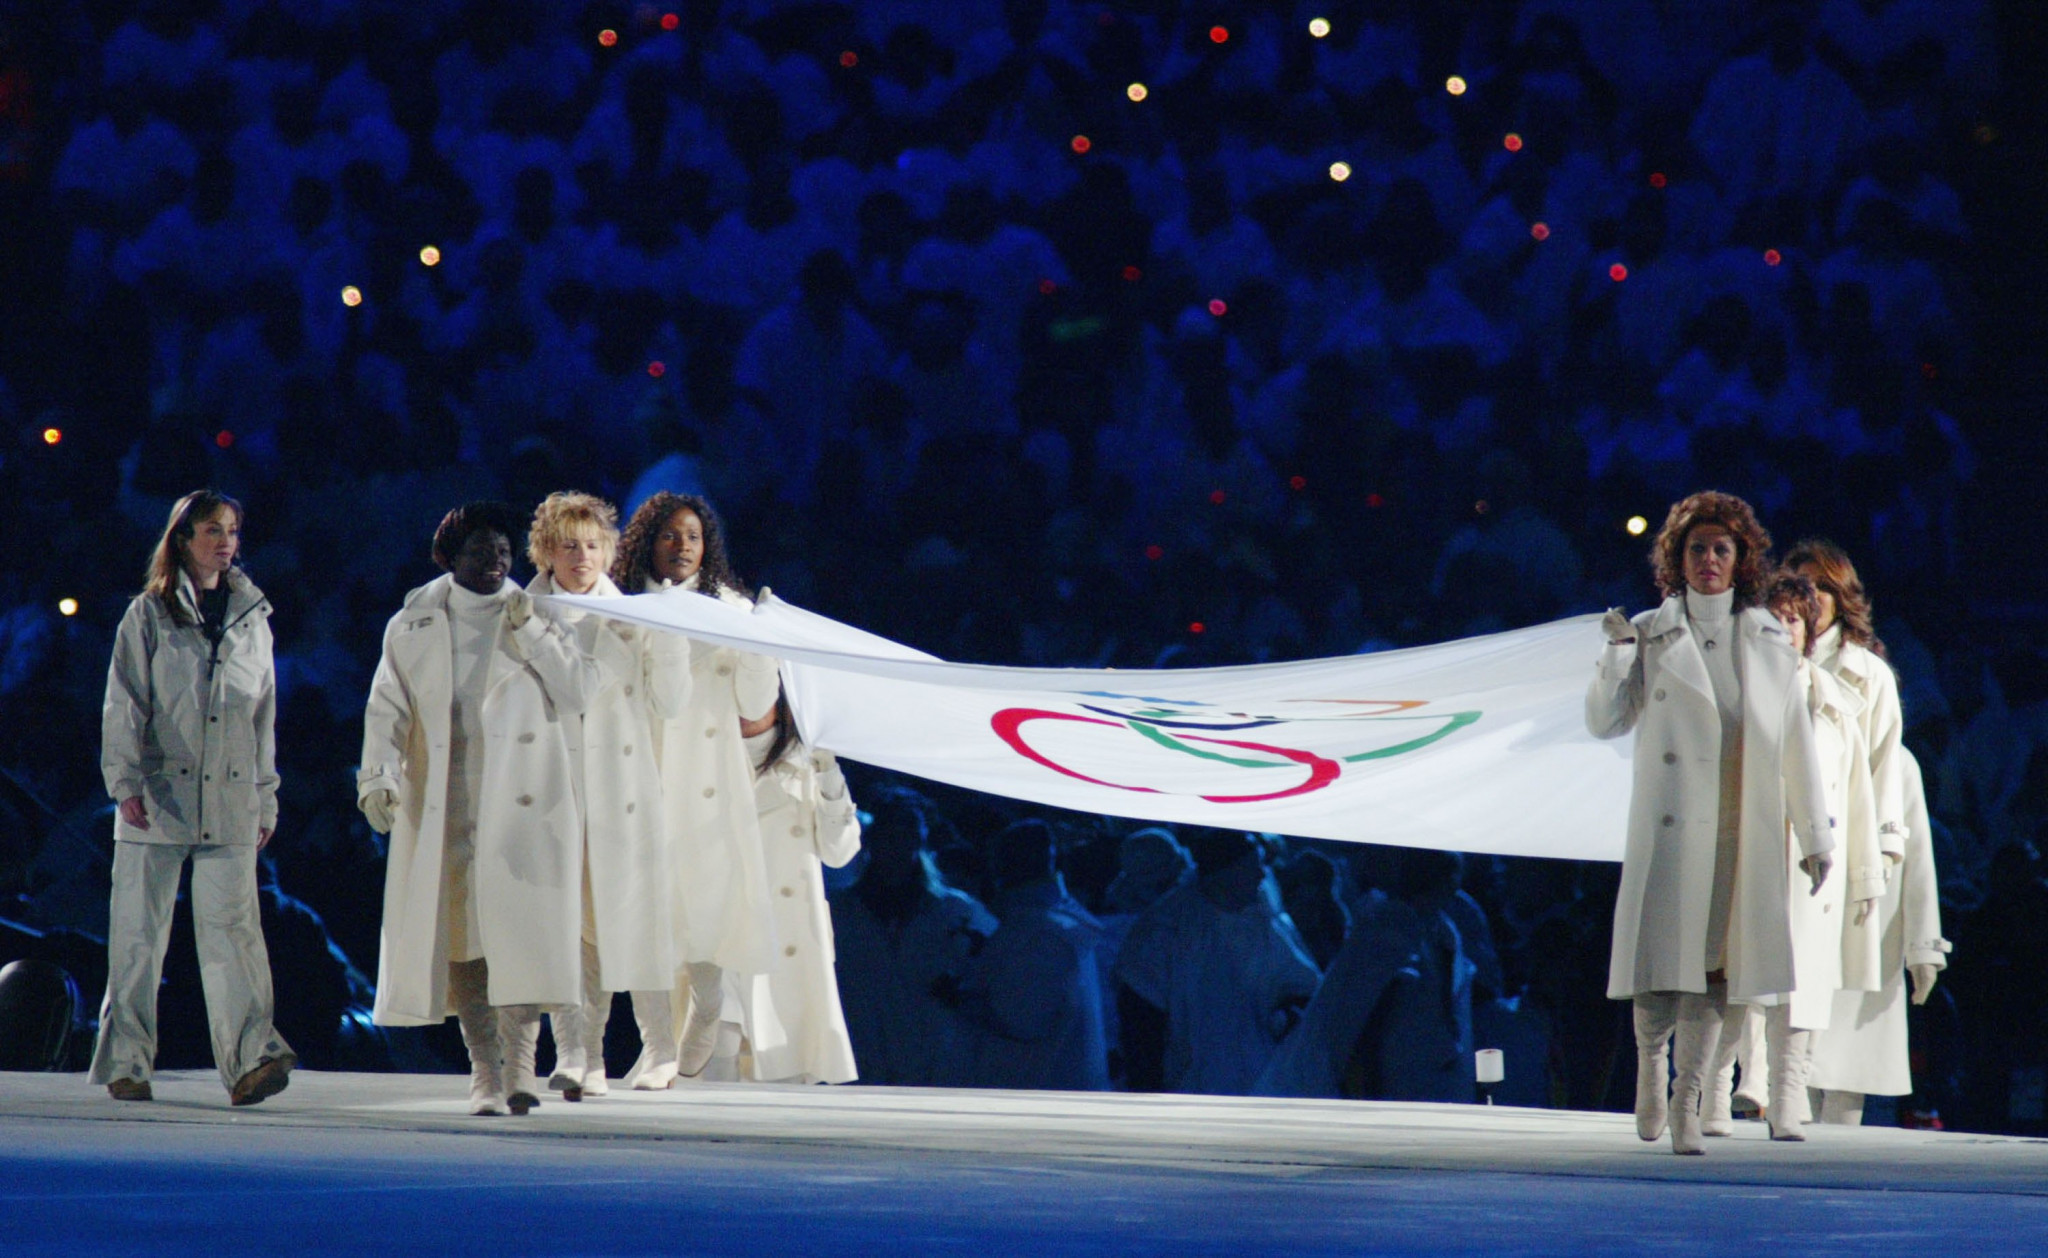 At the 2006 Turin Winter Olympics, the last on Italian soil, prominent women were chosen to carry the Olympic Flag ©Getty Images